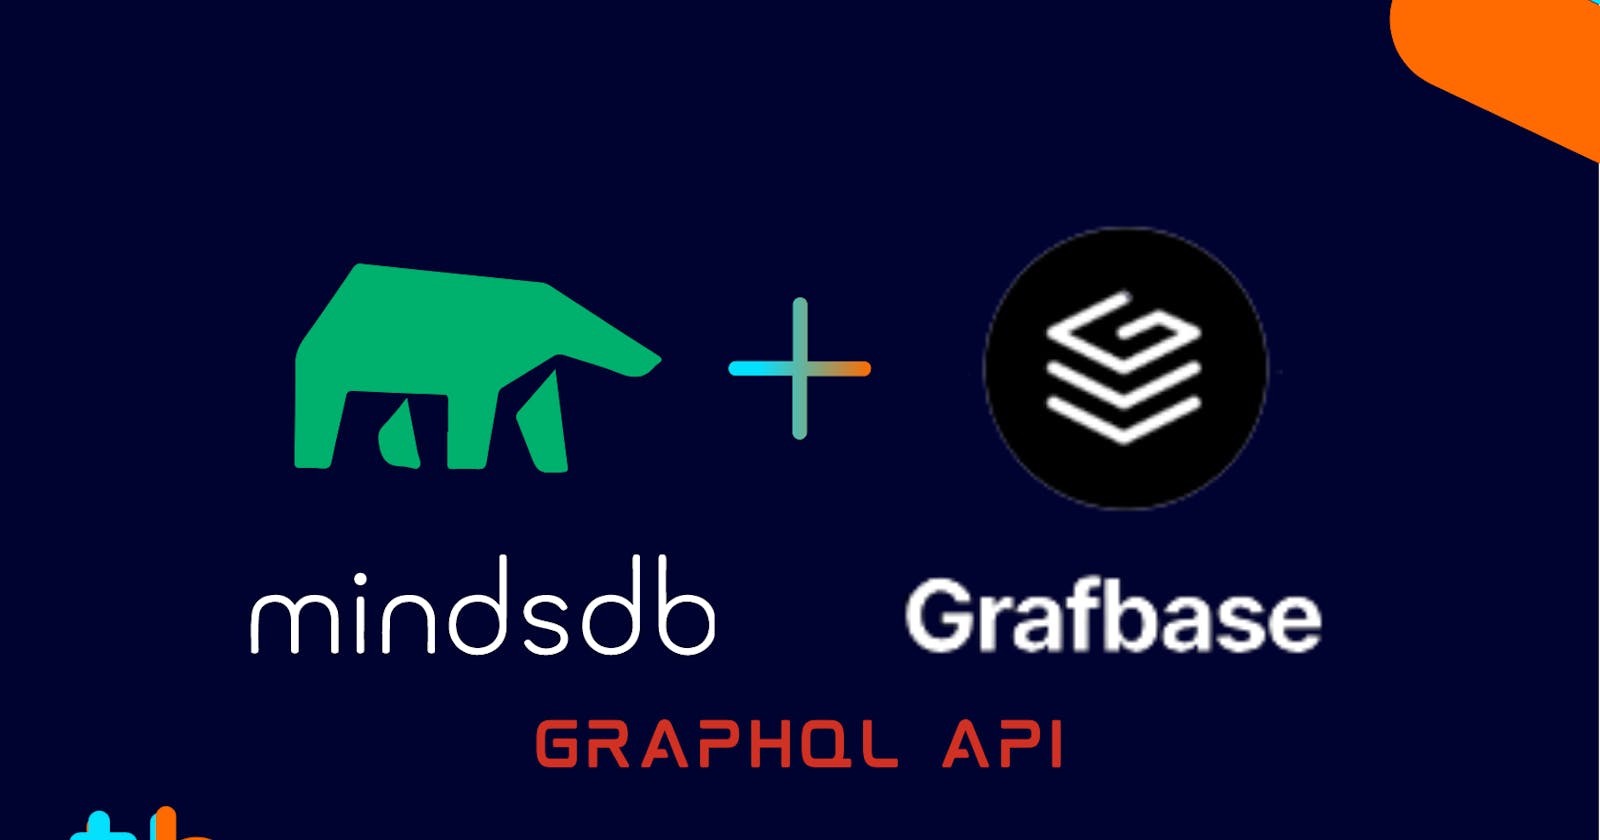 Build ML models with GraphQL API with MindsDB and Grafbase